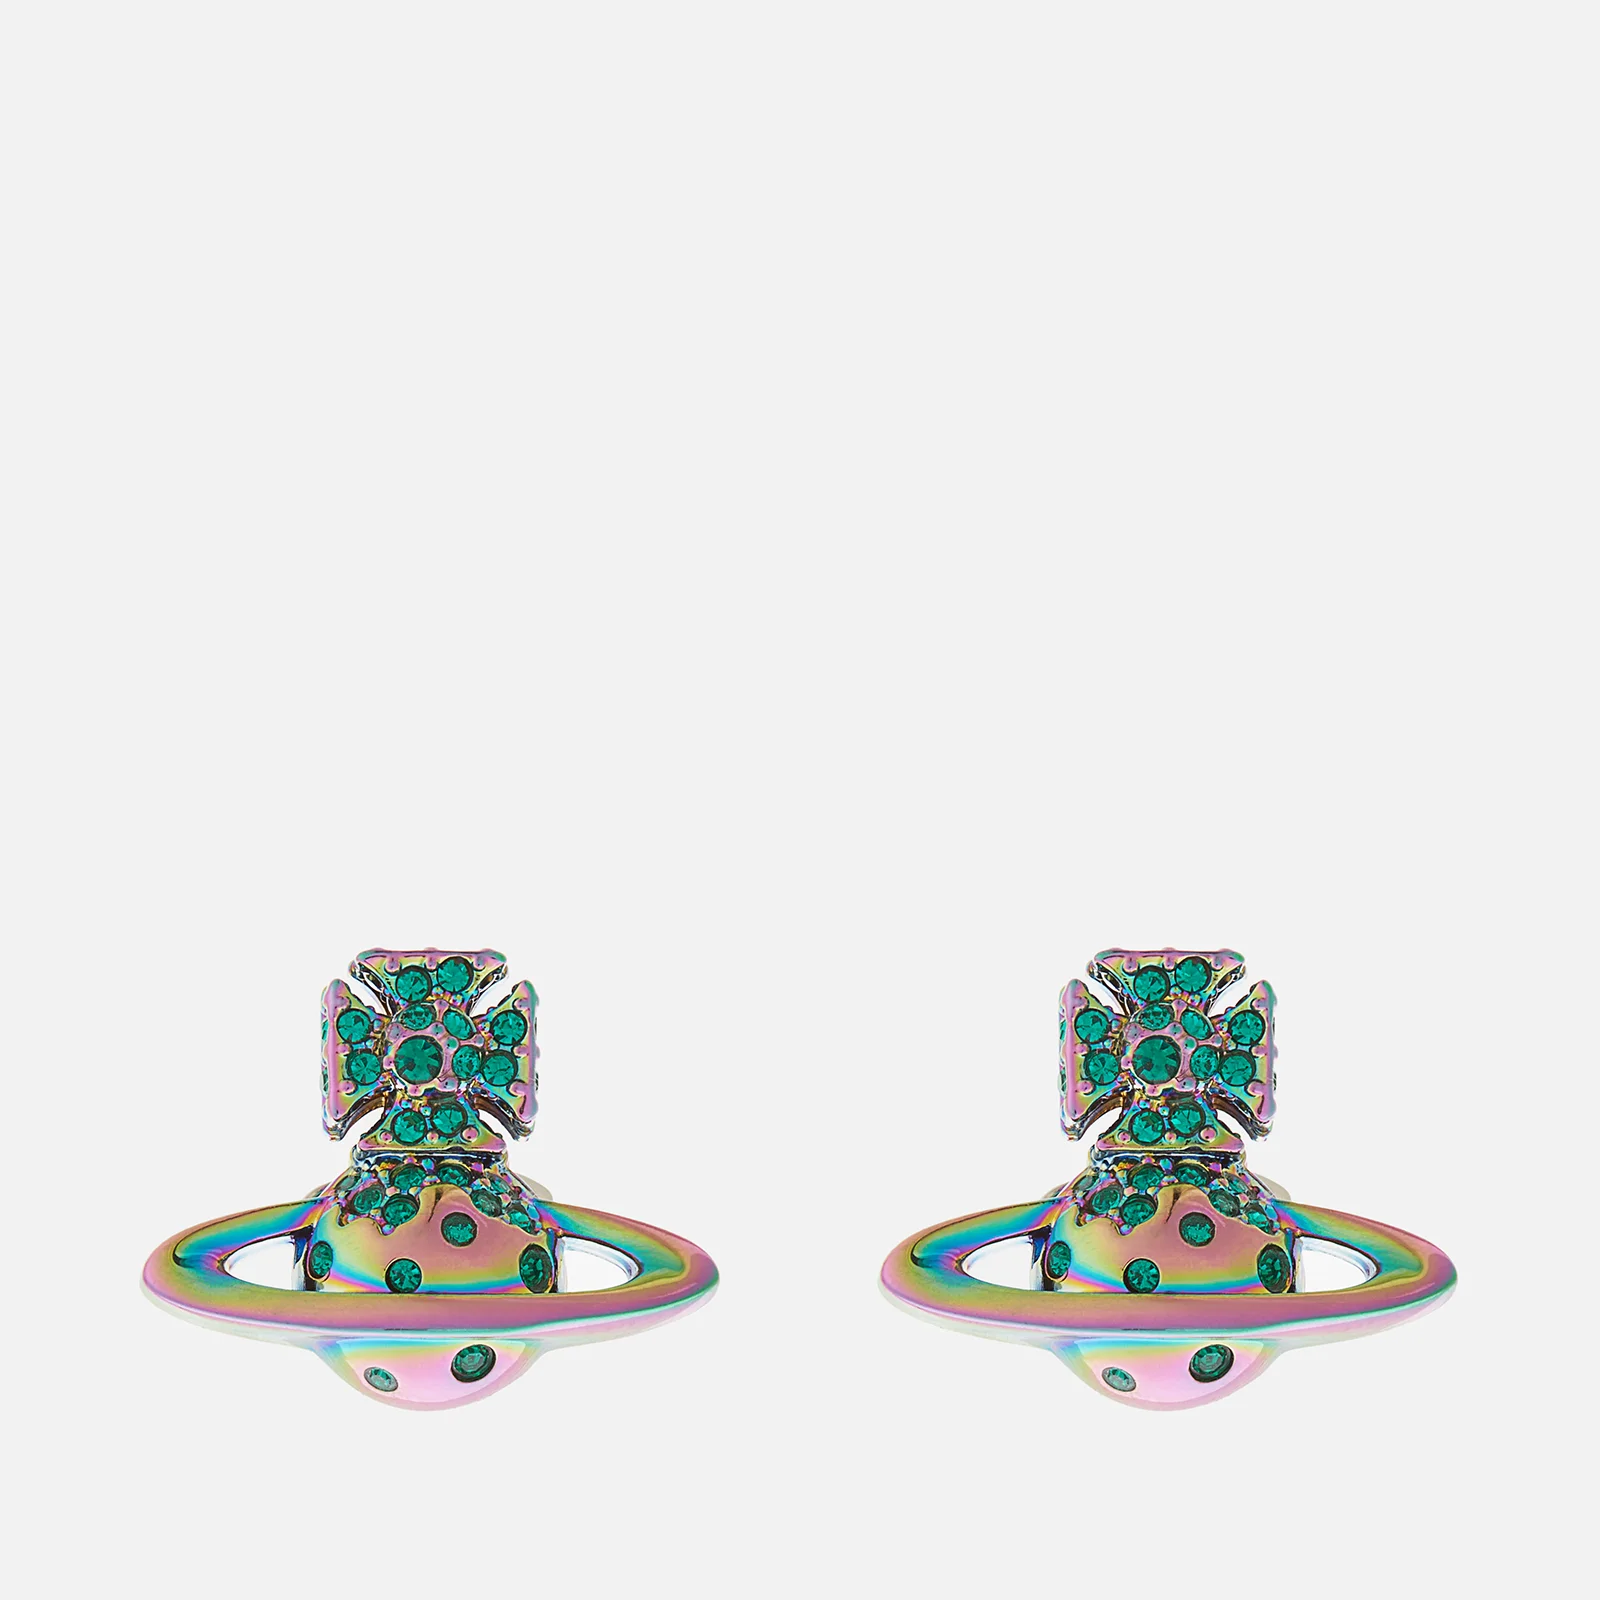 Vivienne Westwood Porfino Bas Relief Iridescent-Tone Brass and Crystal Earrings Image 1